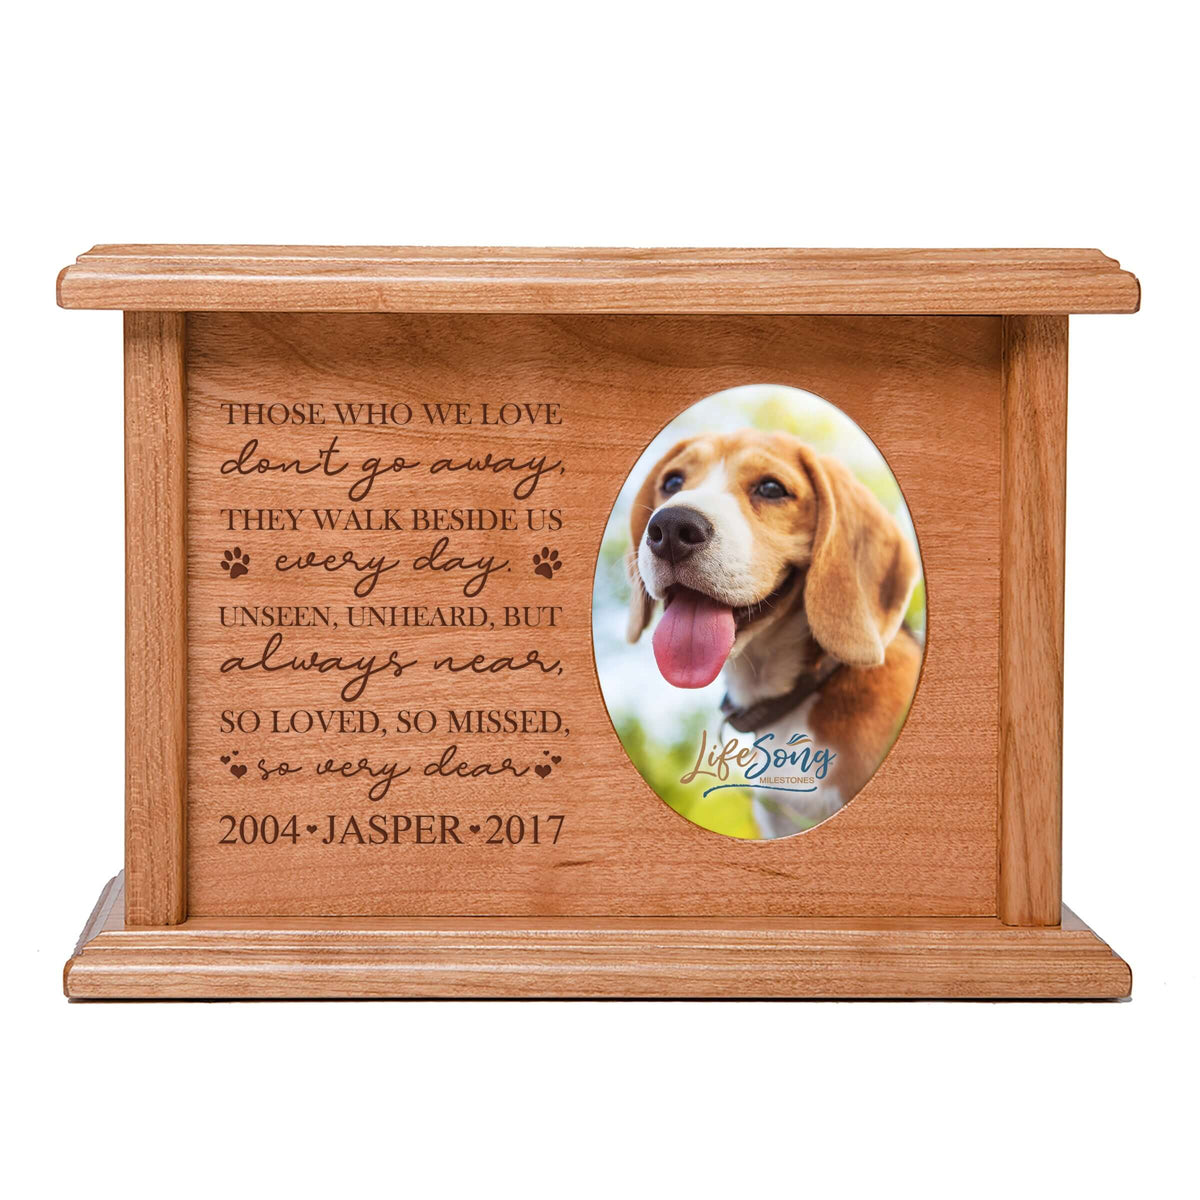 Pet Memorial Picture Cremation Urn Box for Dog or Cat - Those Who We Love Don&#39;t Go Away